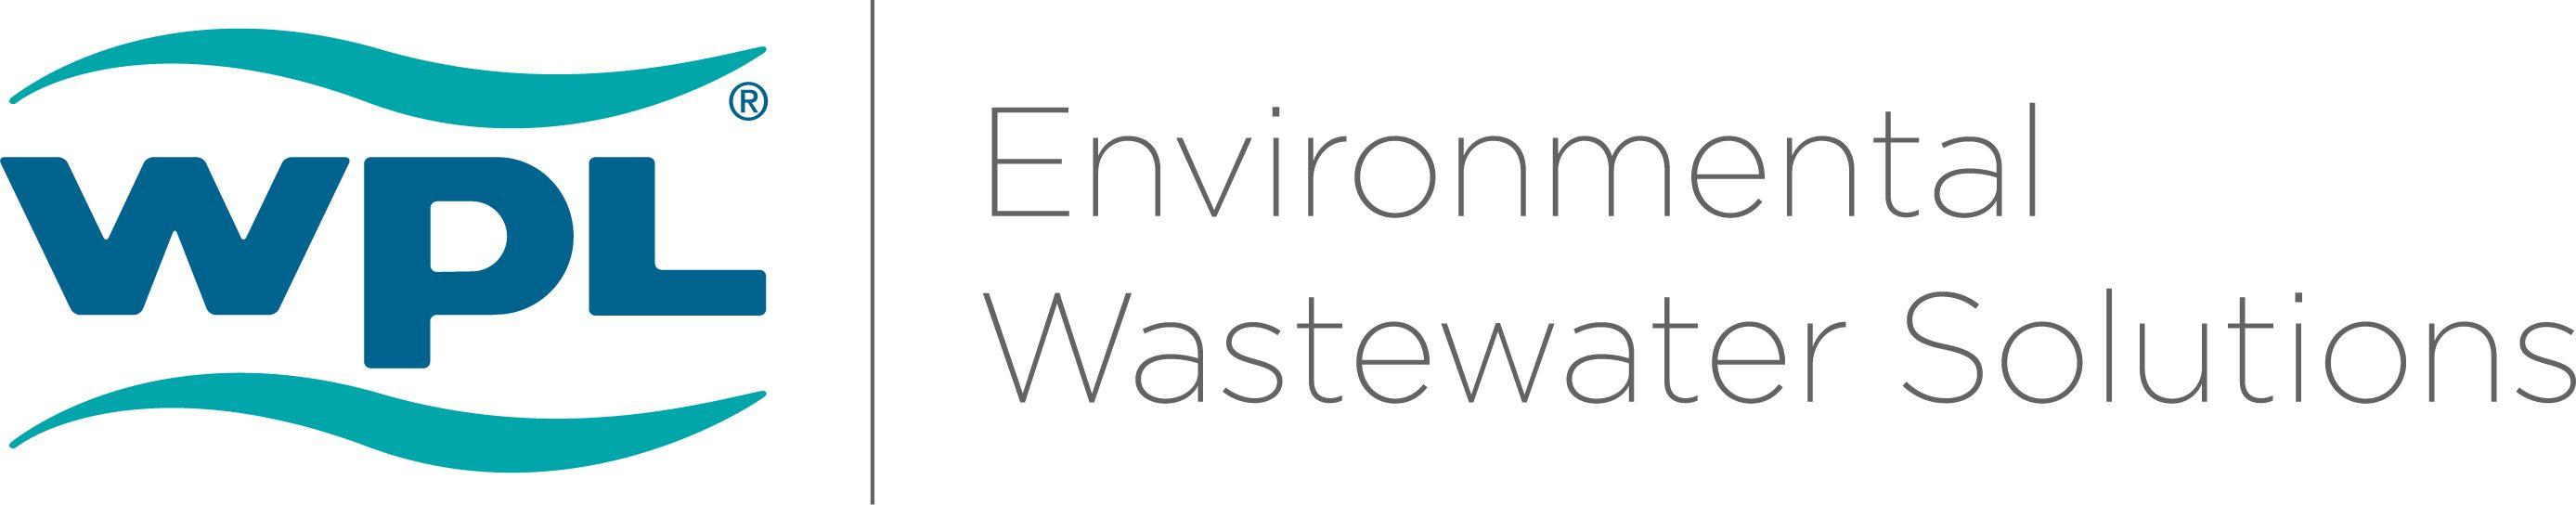 WPL Logo - WPL Environmental Wastewater Treatment Solutions